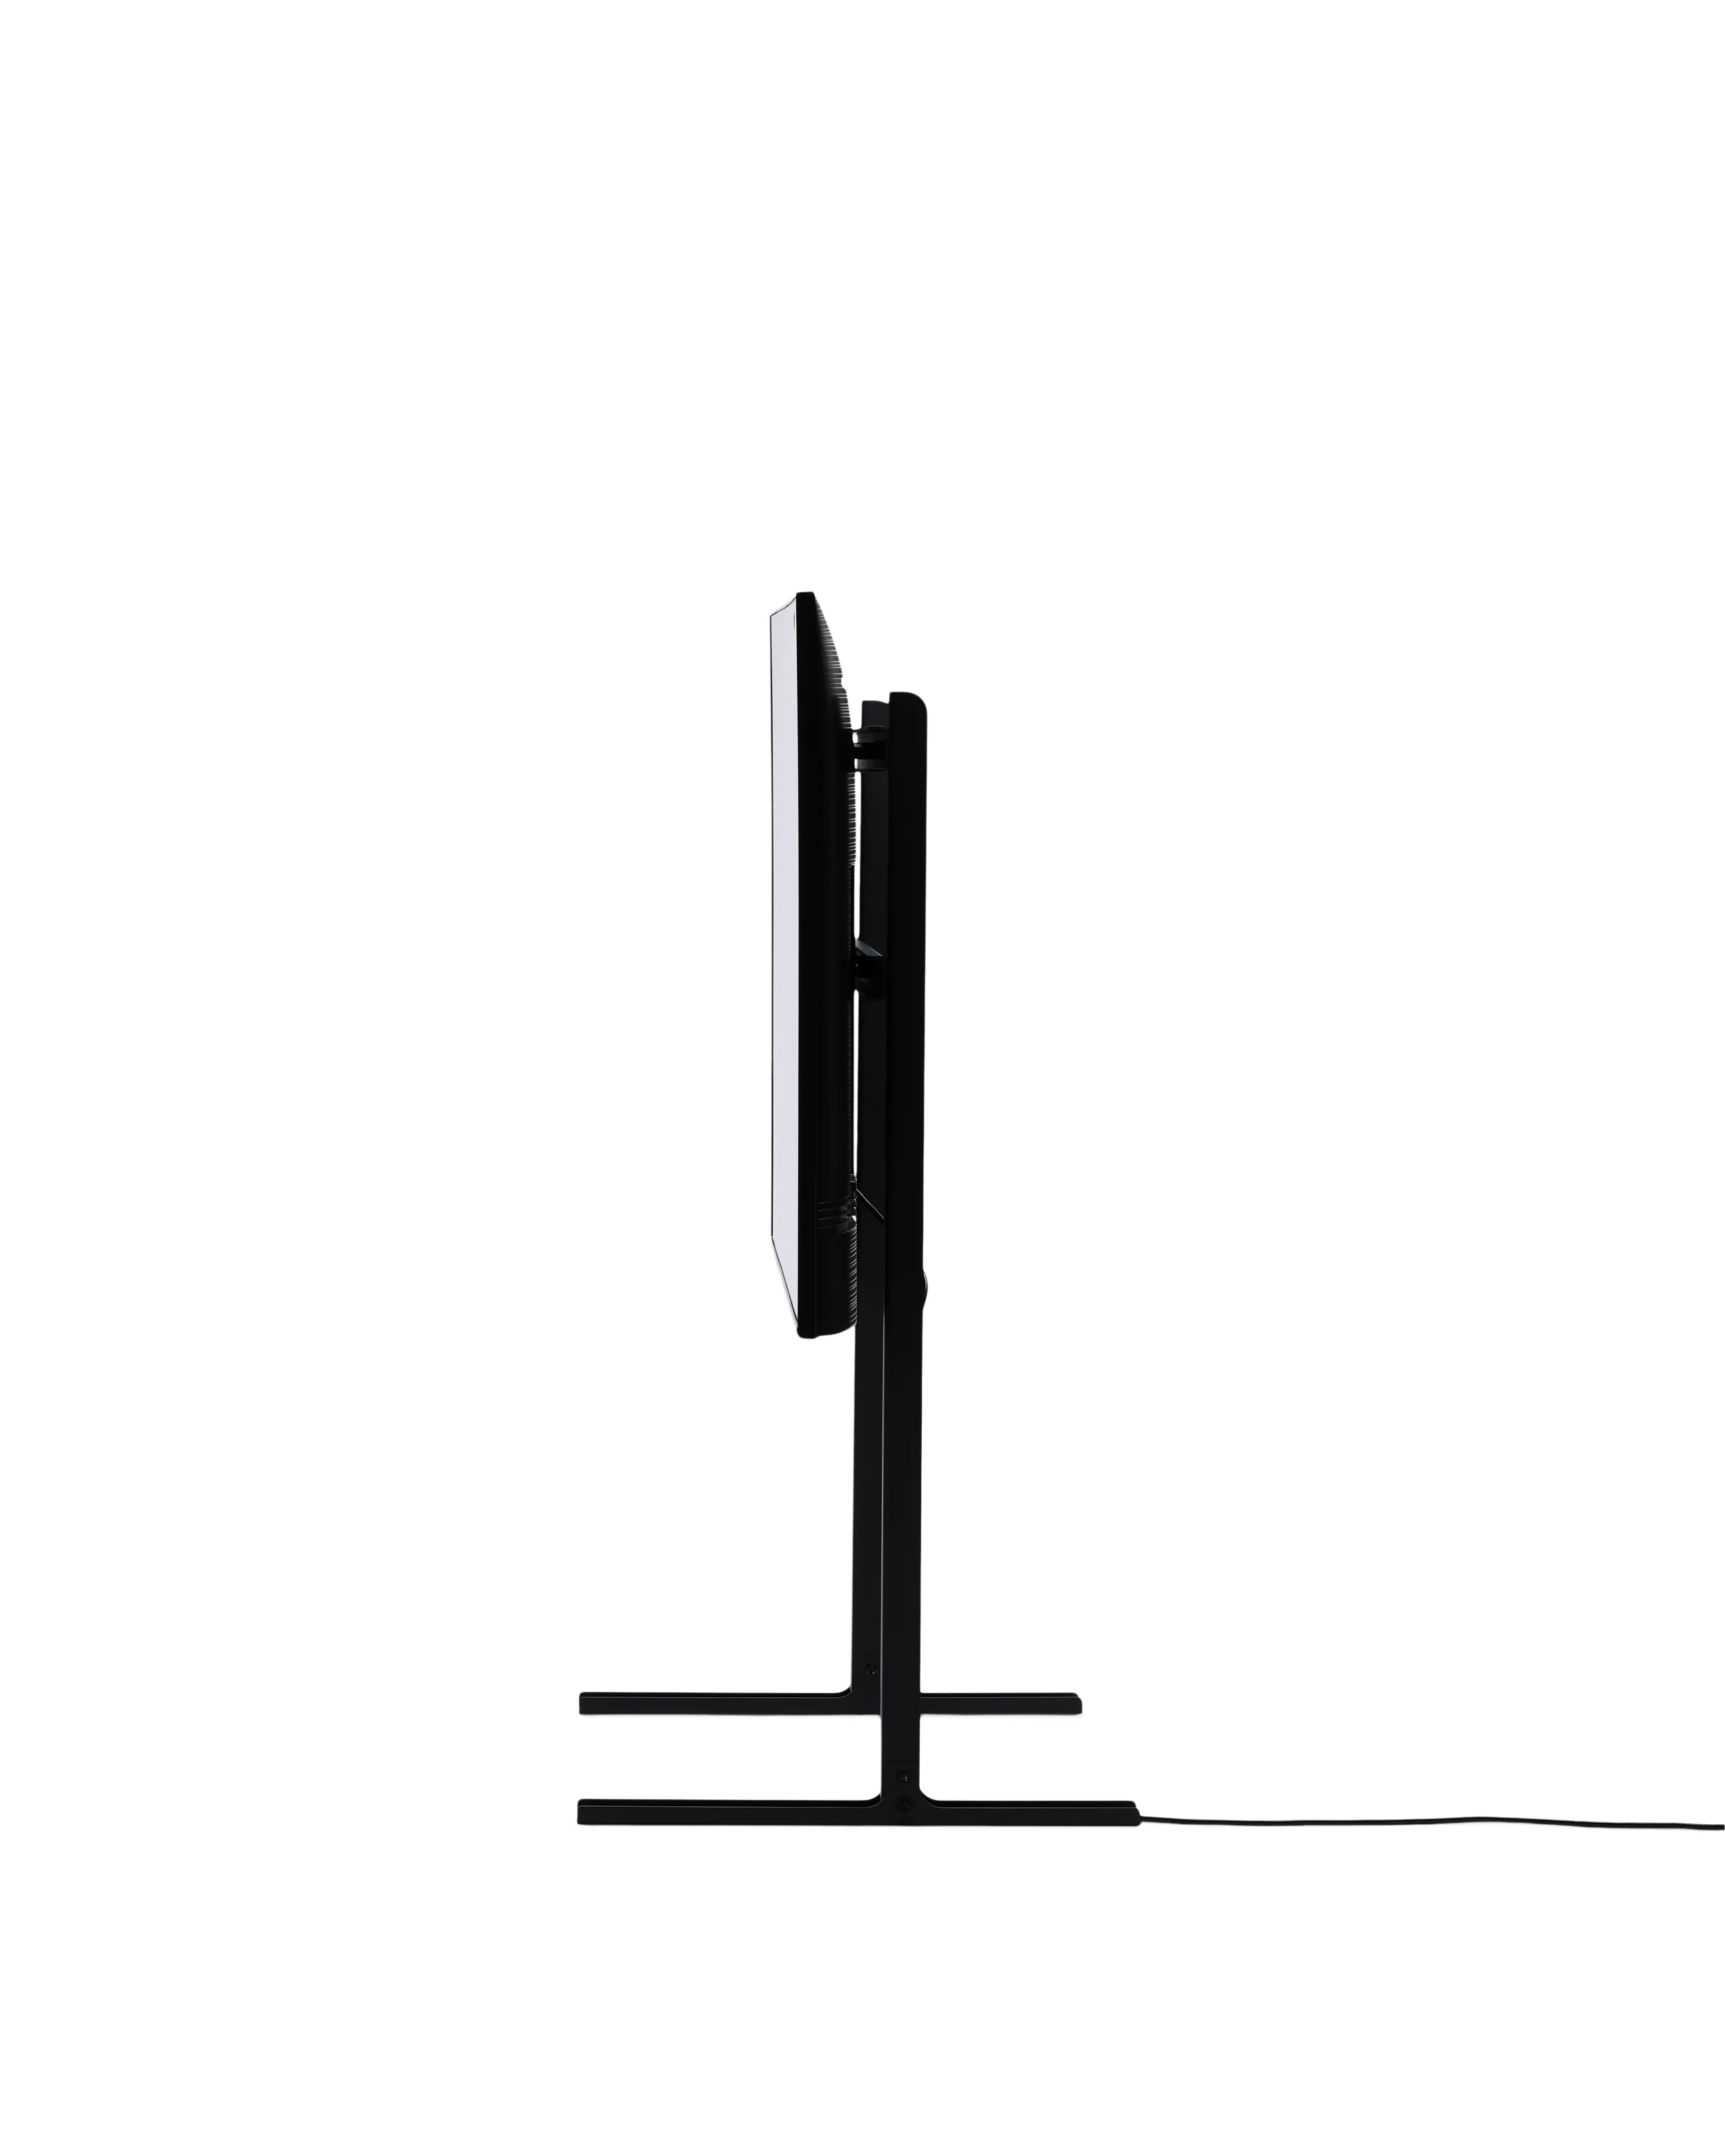 Pedestal - Straight Tall Stand - TV-Stander - Charcoal